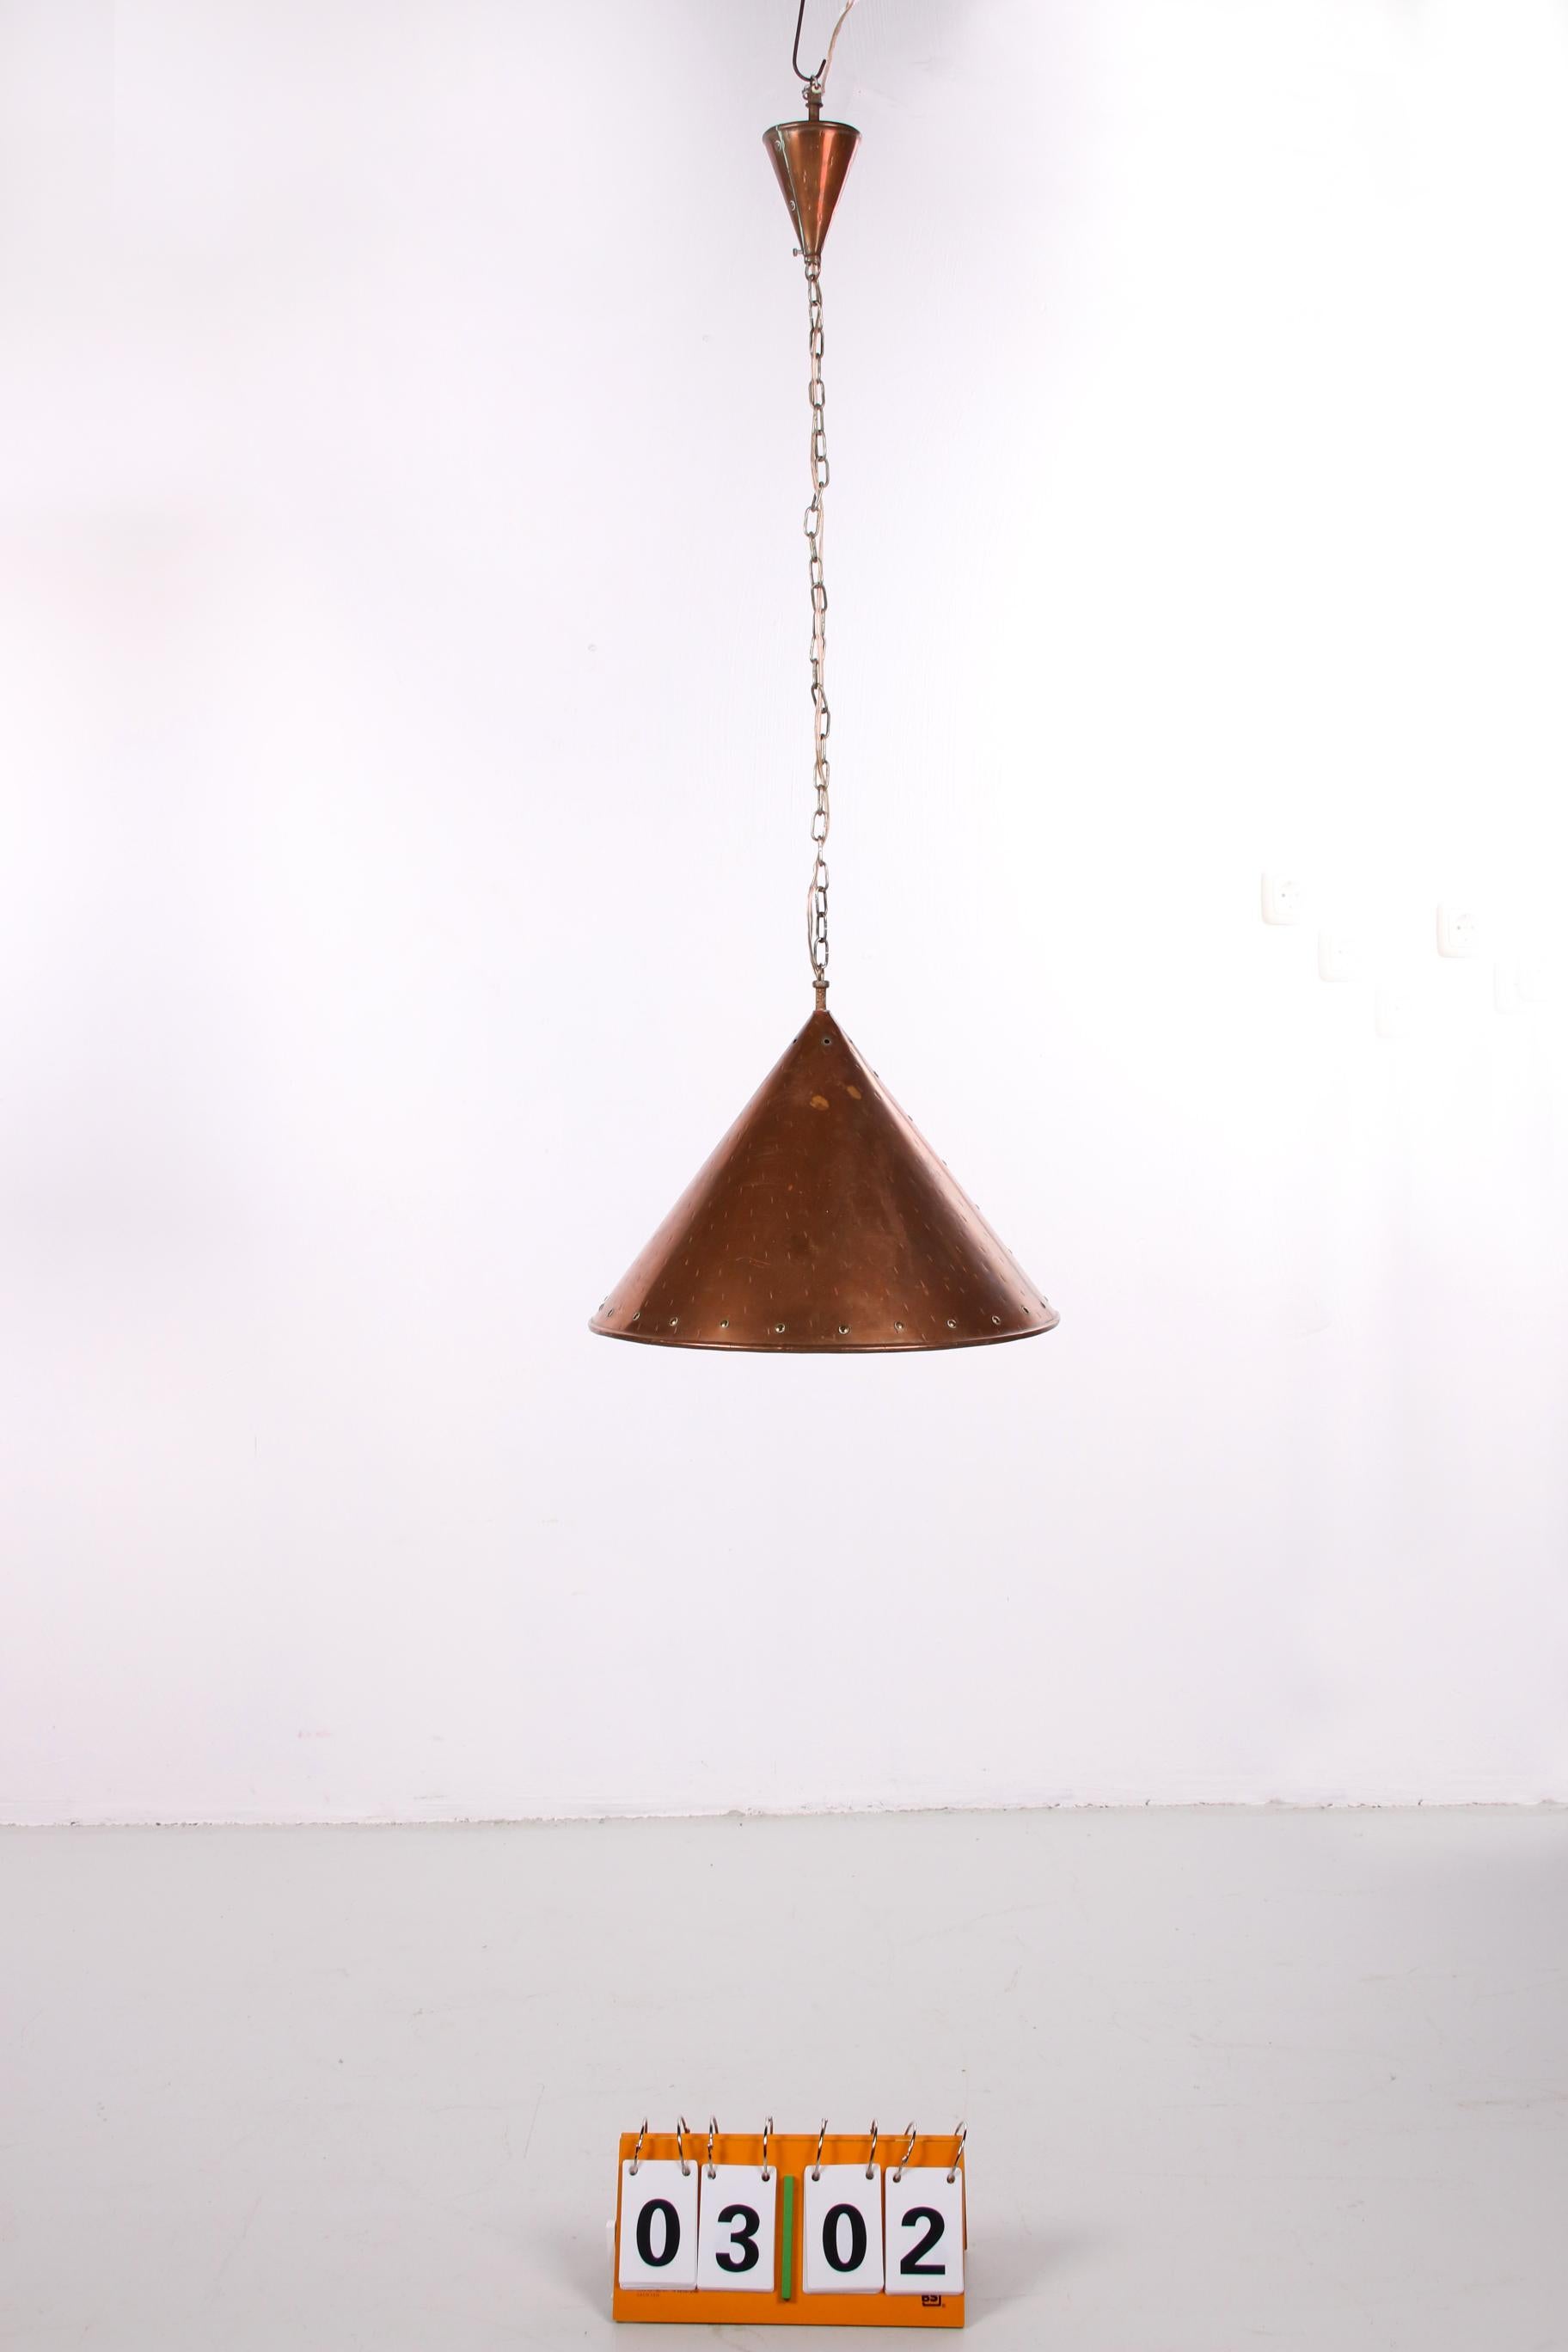 Mid-Century Modern Danish Hand Hammered Copper Pendant Lamps by ES Horn Aalestrup, 1950s For Sale